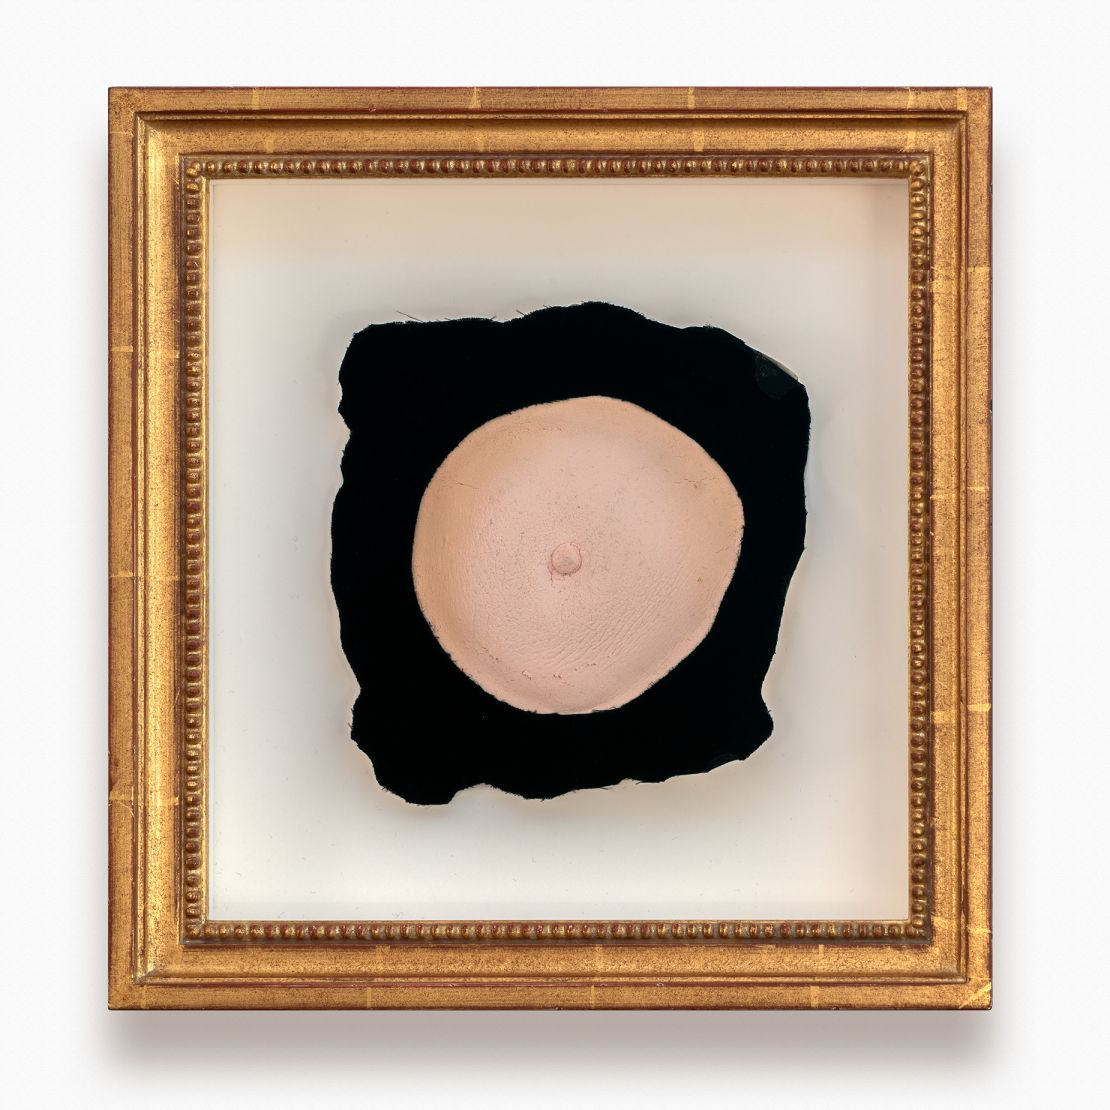 A crowd of breast-themed works, including this 1947 foam rubber breast titled "Prière de Toucher" by Marcel Duchamp, will be on display at the Palazzo Franchetti San Marco.